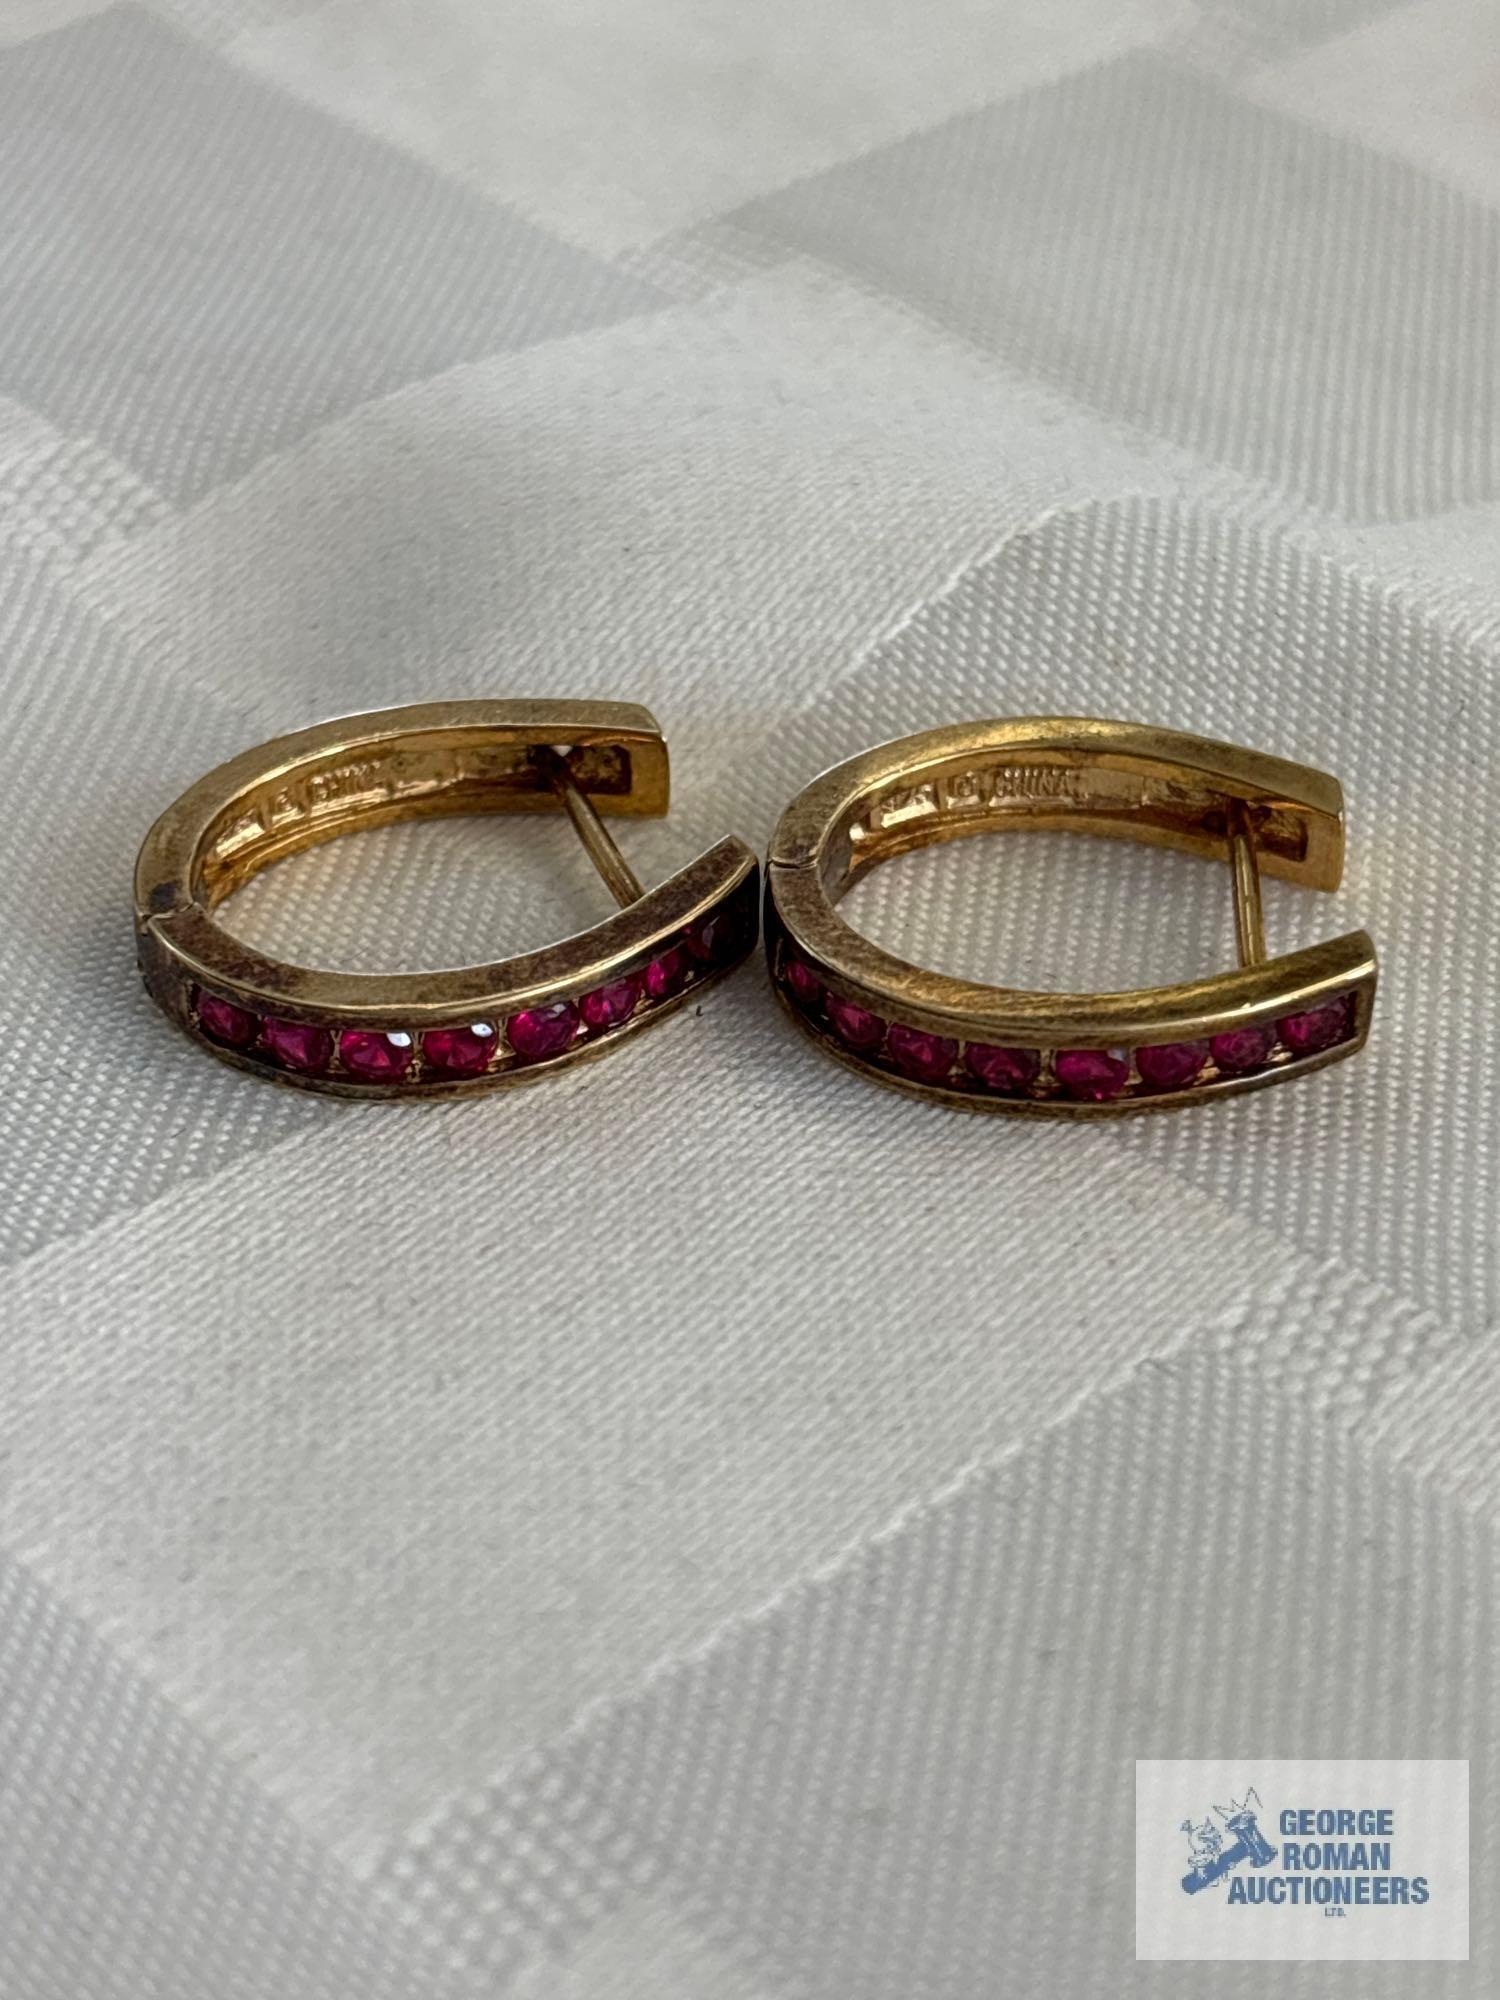 Gold colored earrings with reddish pink gemstones, marked 925, approximate total weight 4.95 G